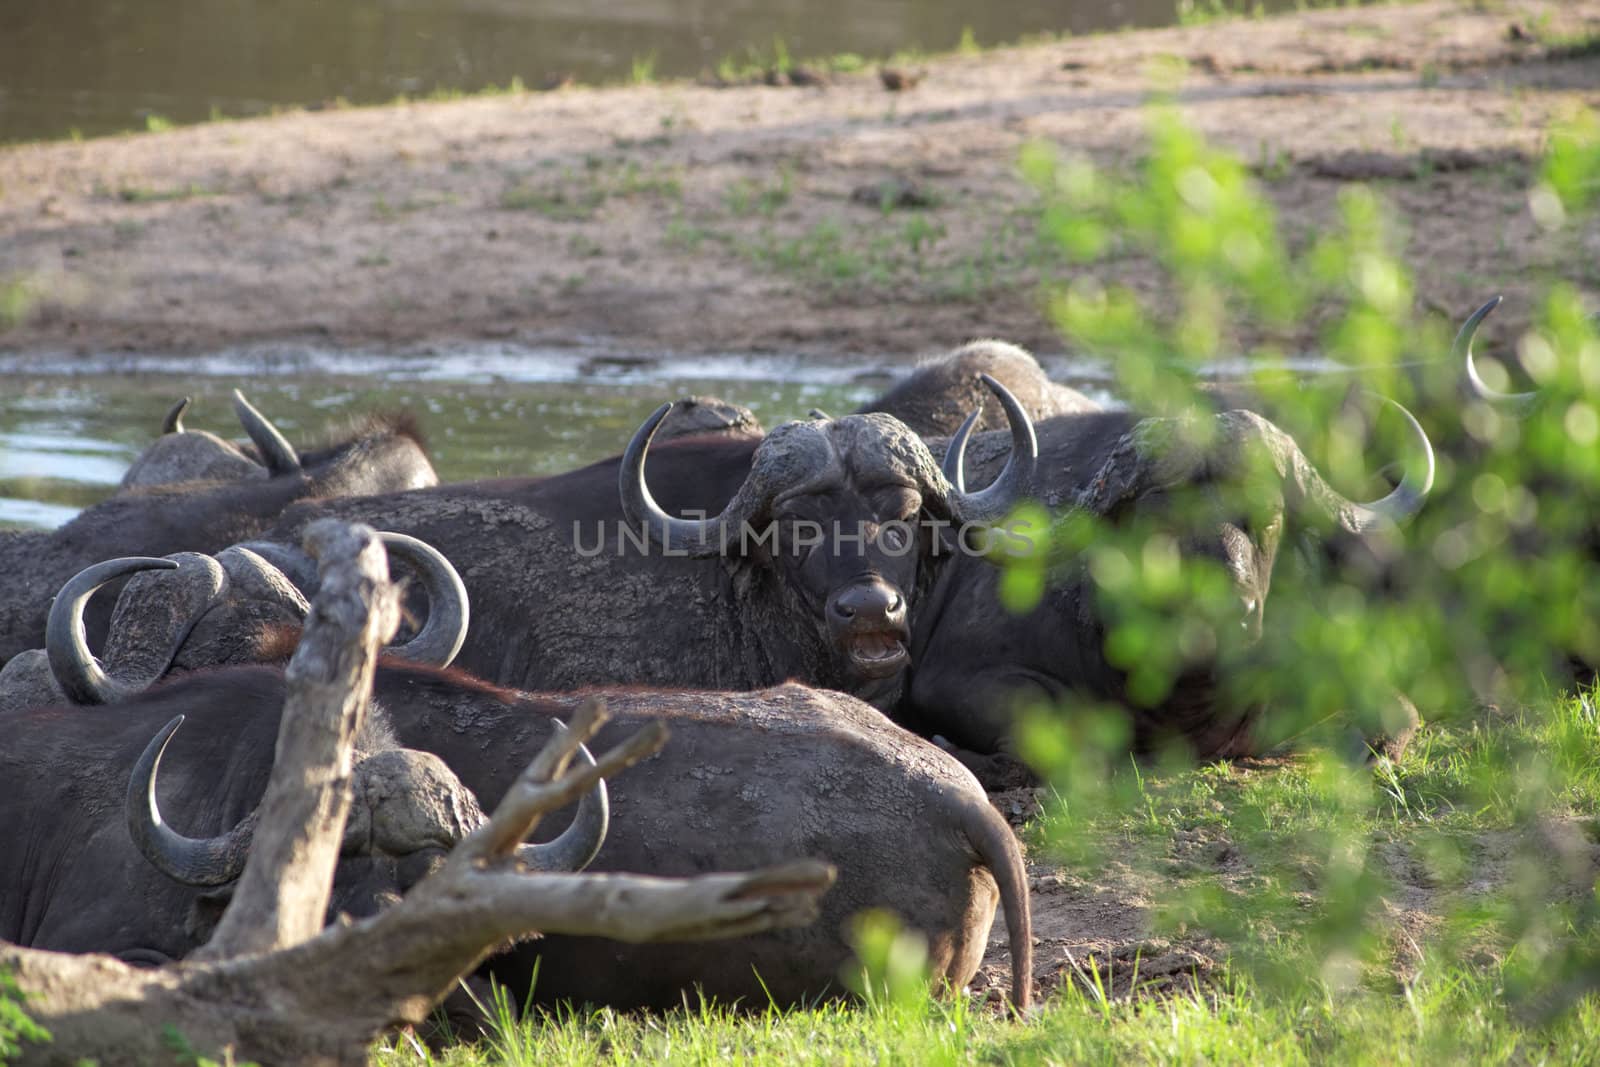 Herd of Cape buffalo, Syncerus caffer, standing close together in a depression alongside water watching the camera in African savannah